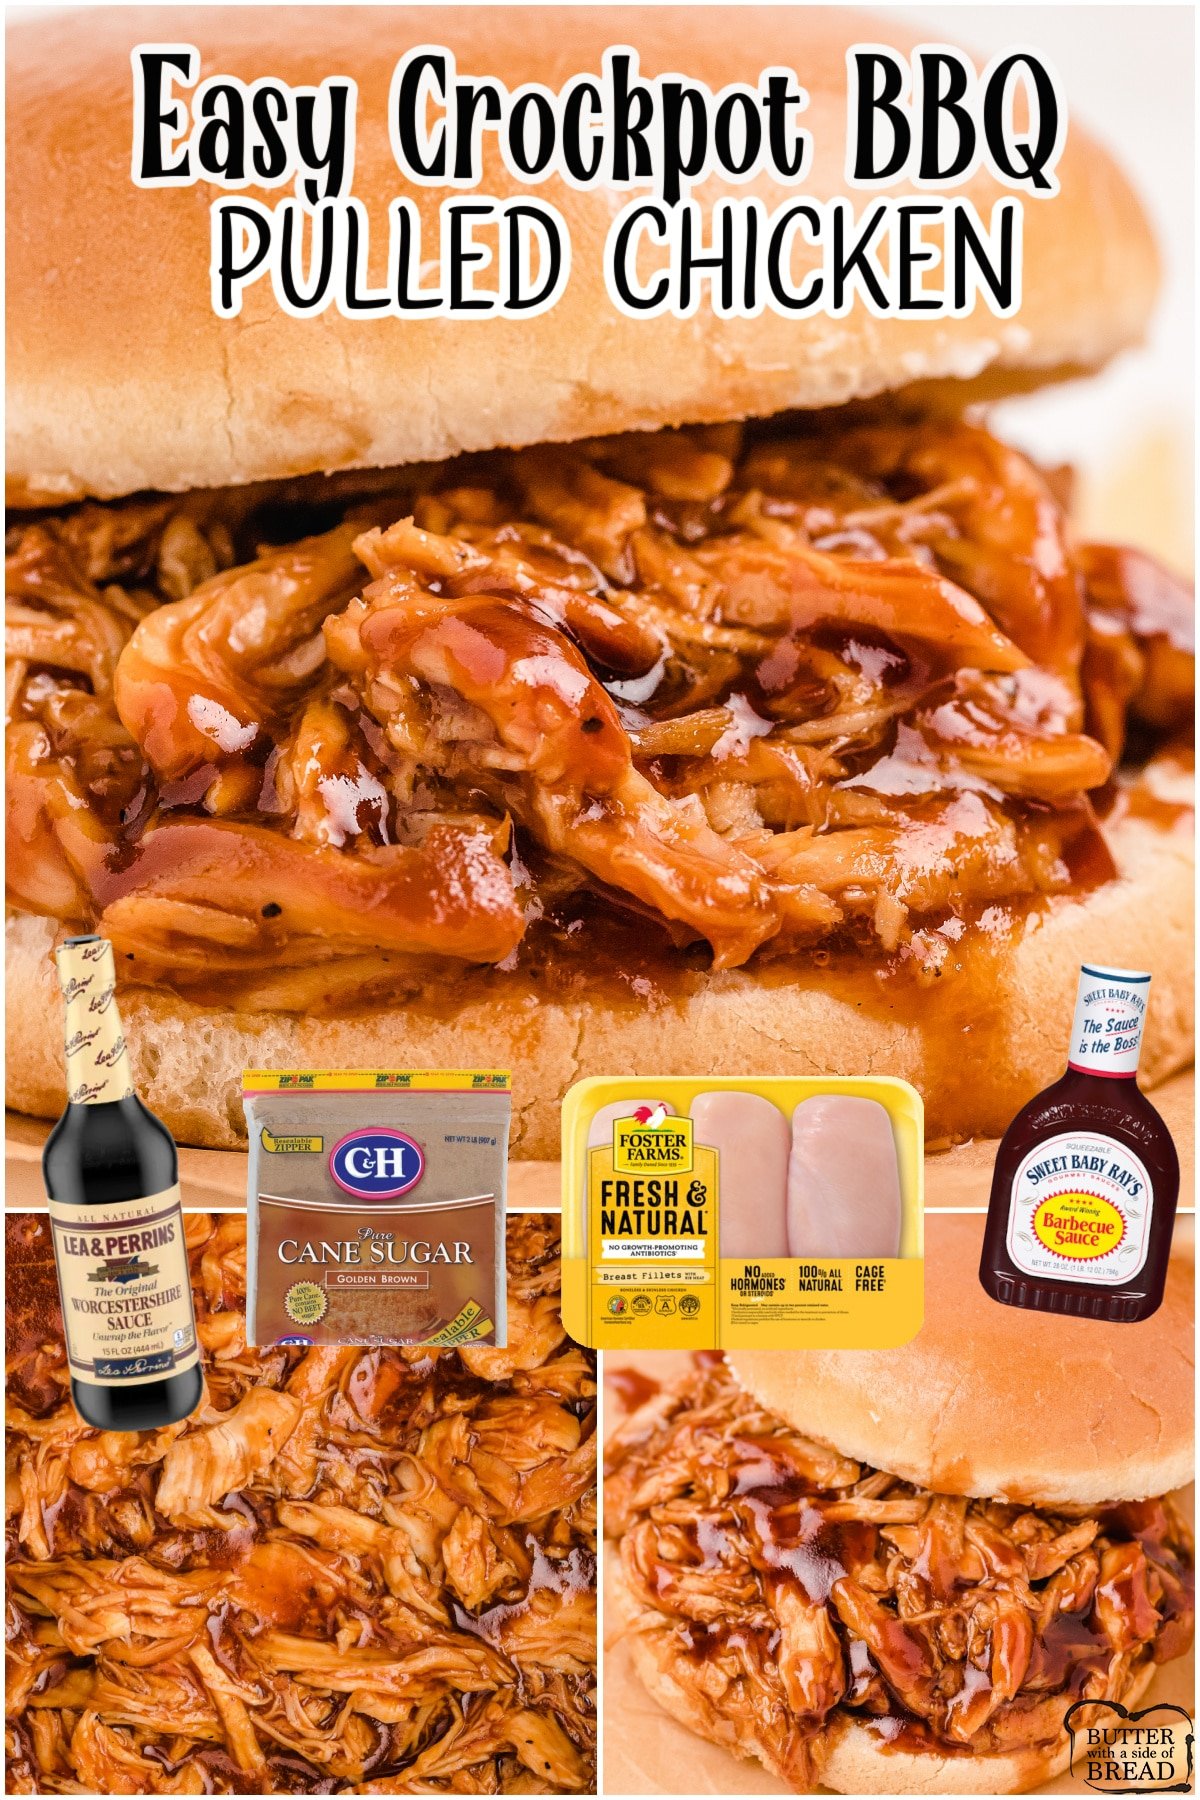 Crockpot Pulled BBQ Chicken Sandwiches are an easy slow cooker made with only 5 ingredients! The tender and tasty shredded chicken sandwiches are a great weekday meal that everyone loves.